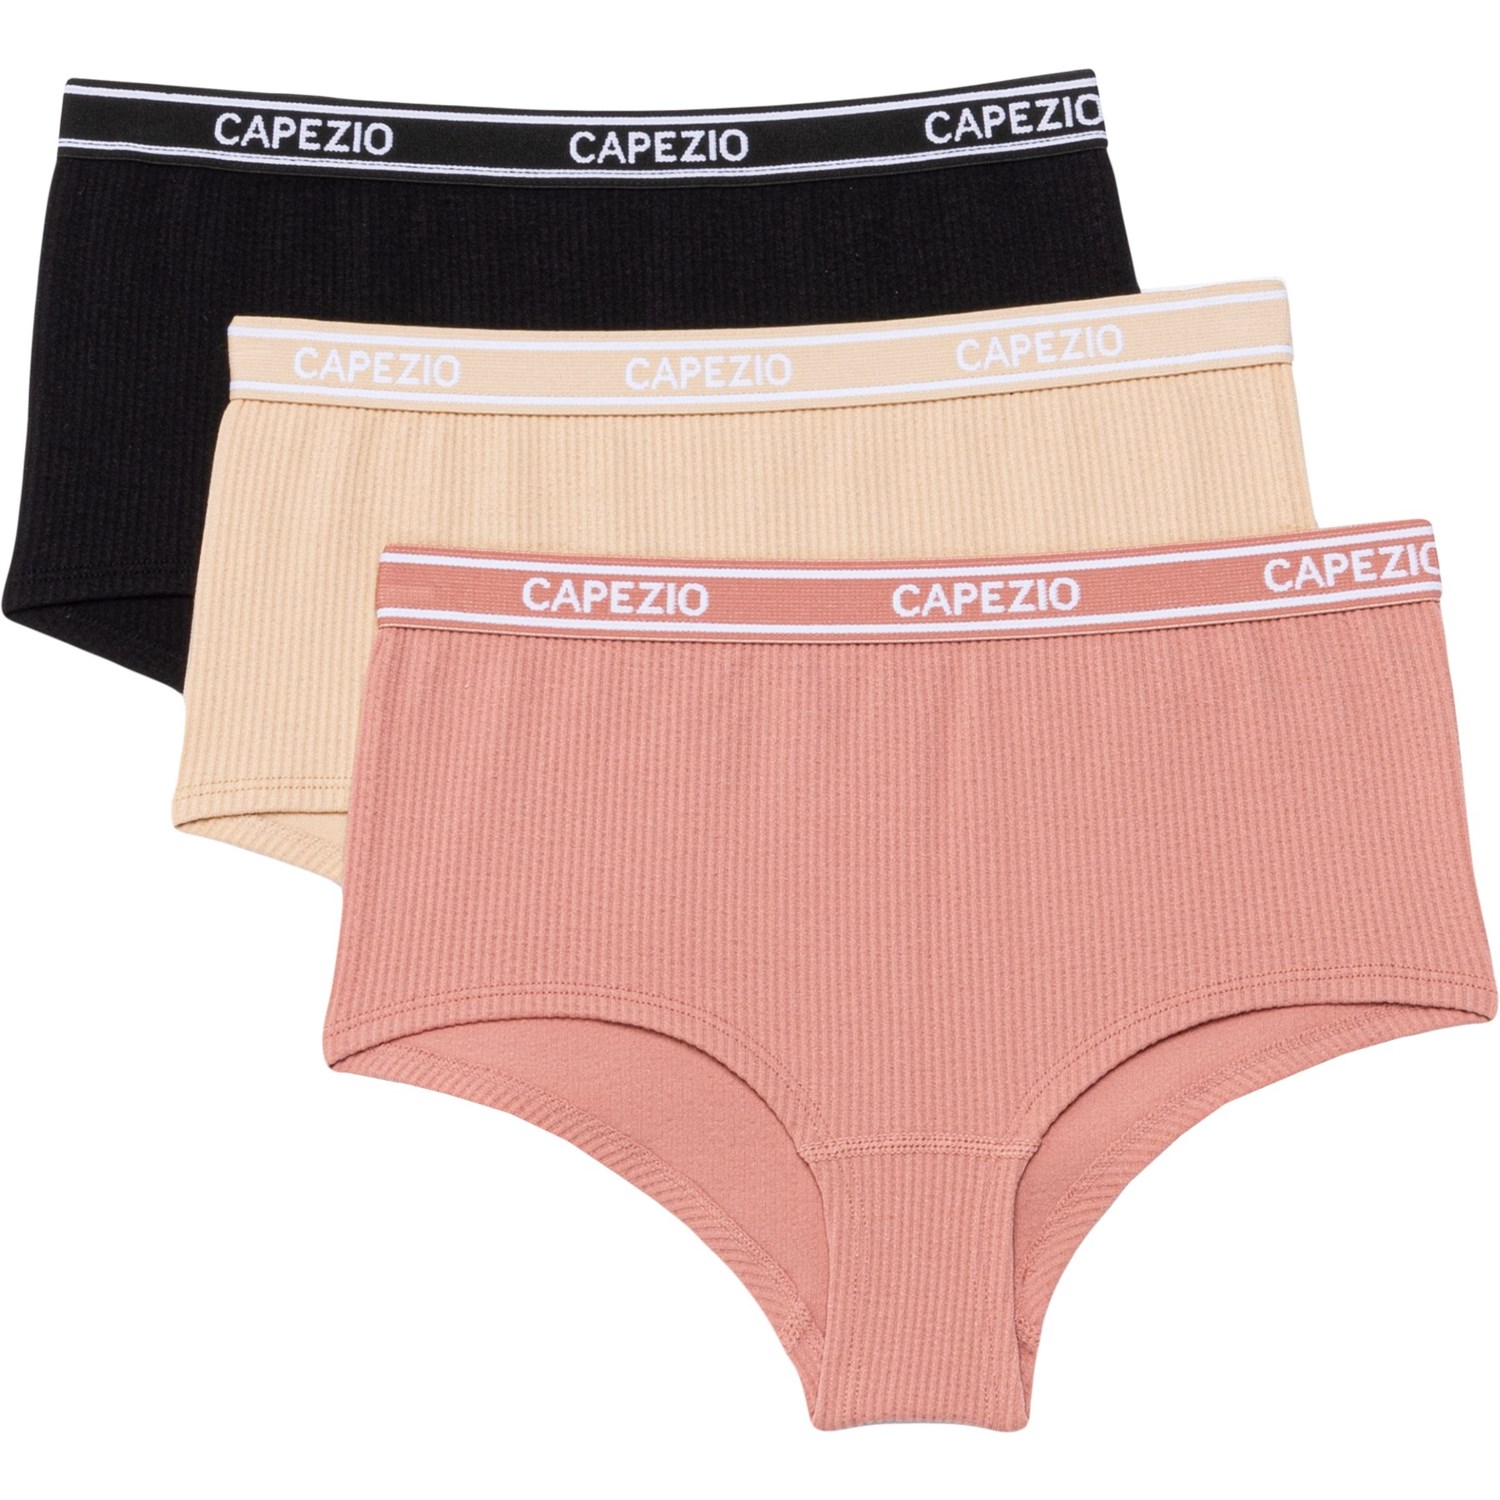 CAPEZIO Ribbed Seamless Shortie Panties - 3-Pack, Boy Shorts